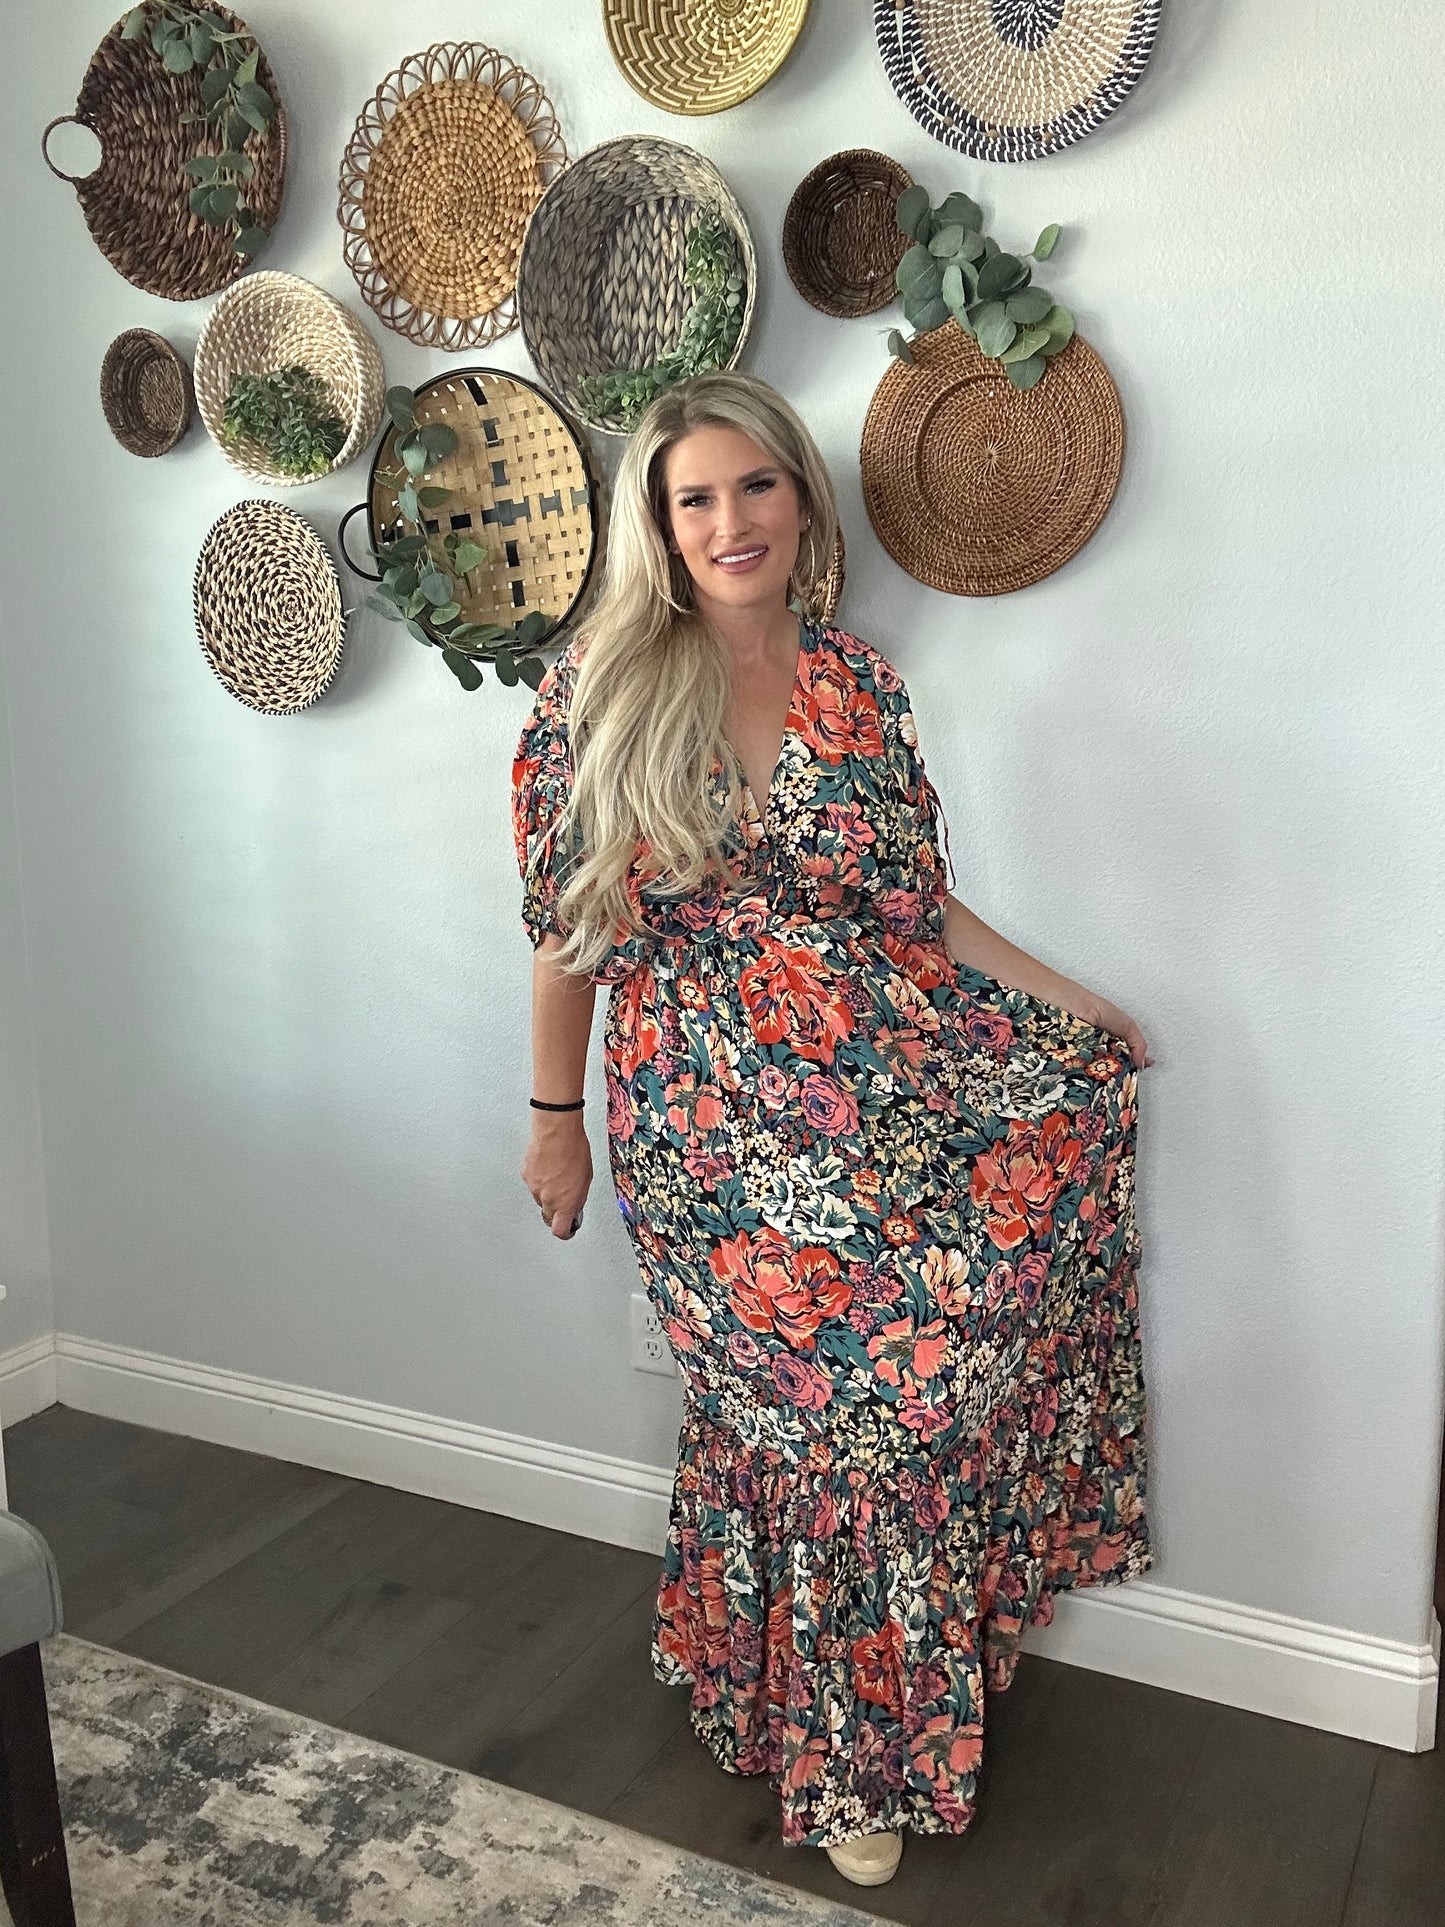 Falling in love with floral Maxi